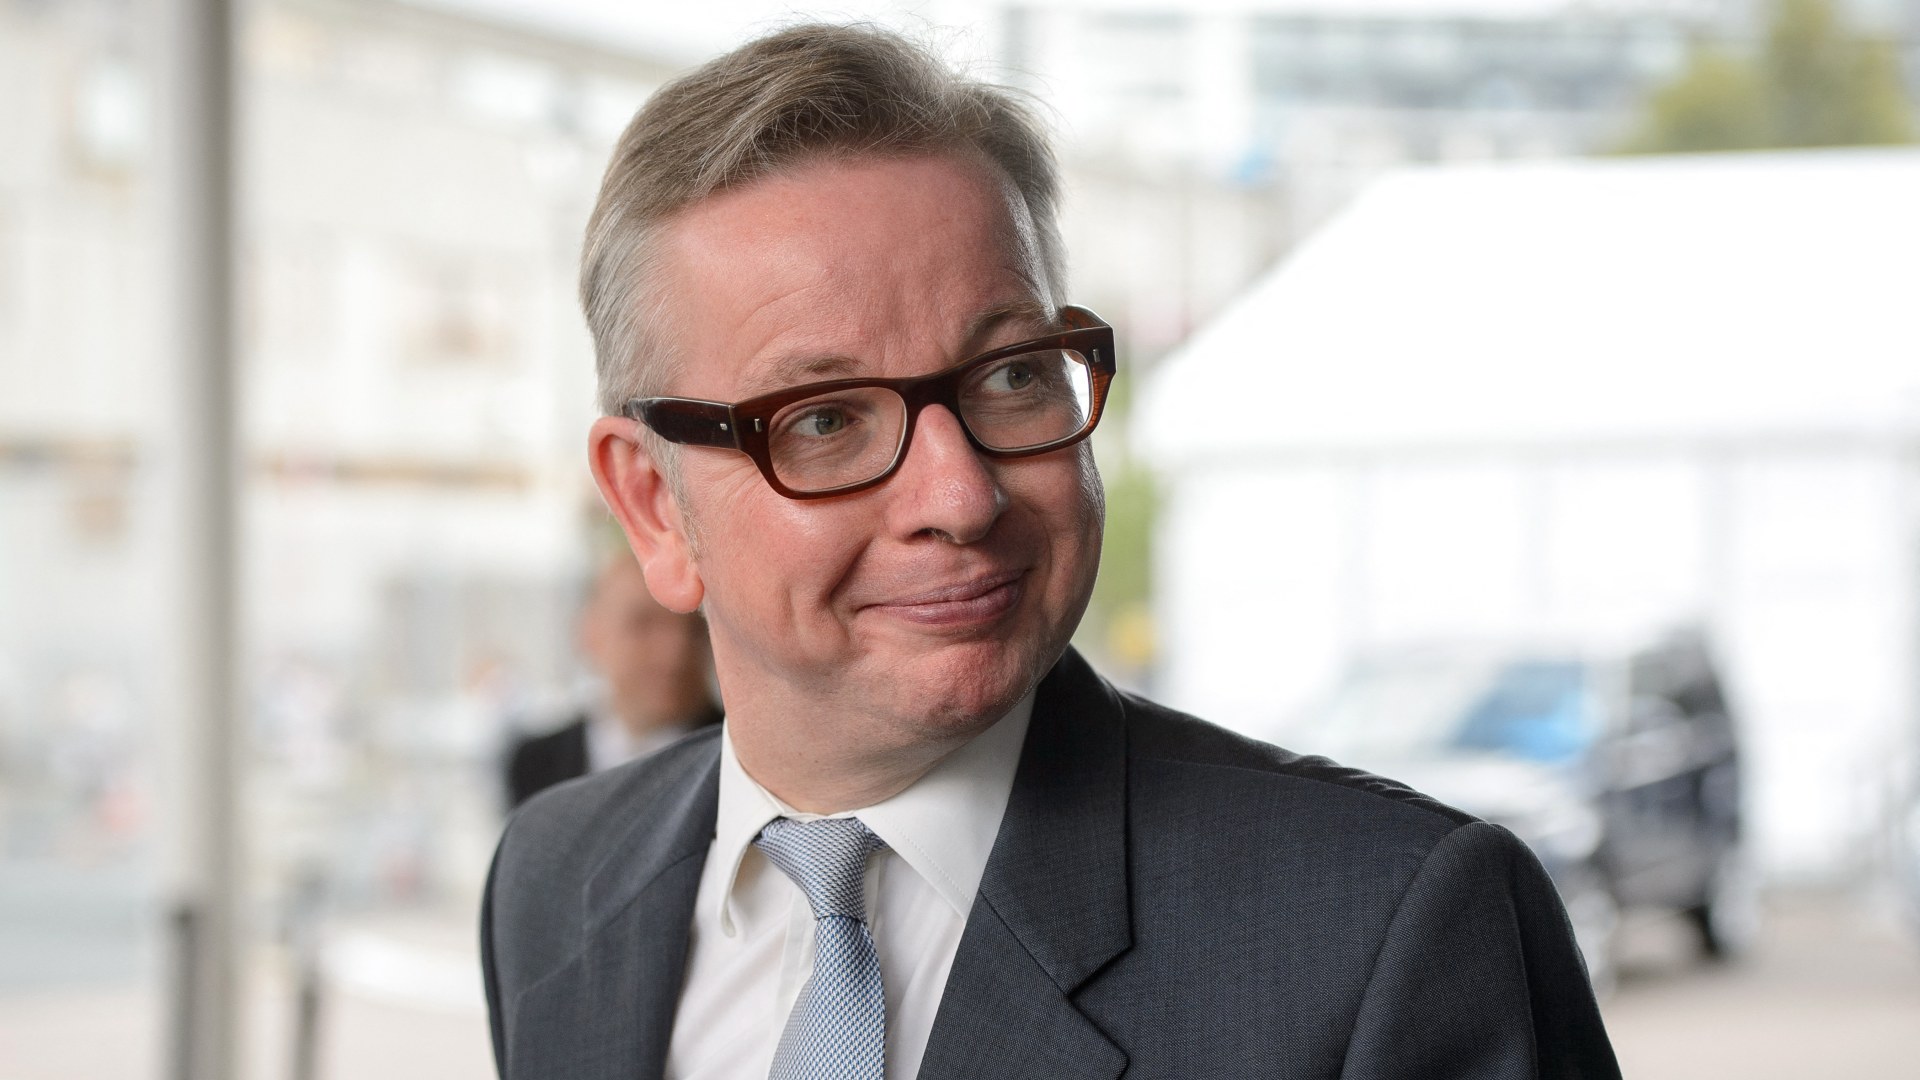 Michael Gove, pictured in Birmingham in September 2014 (AFP)